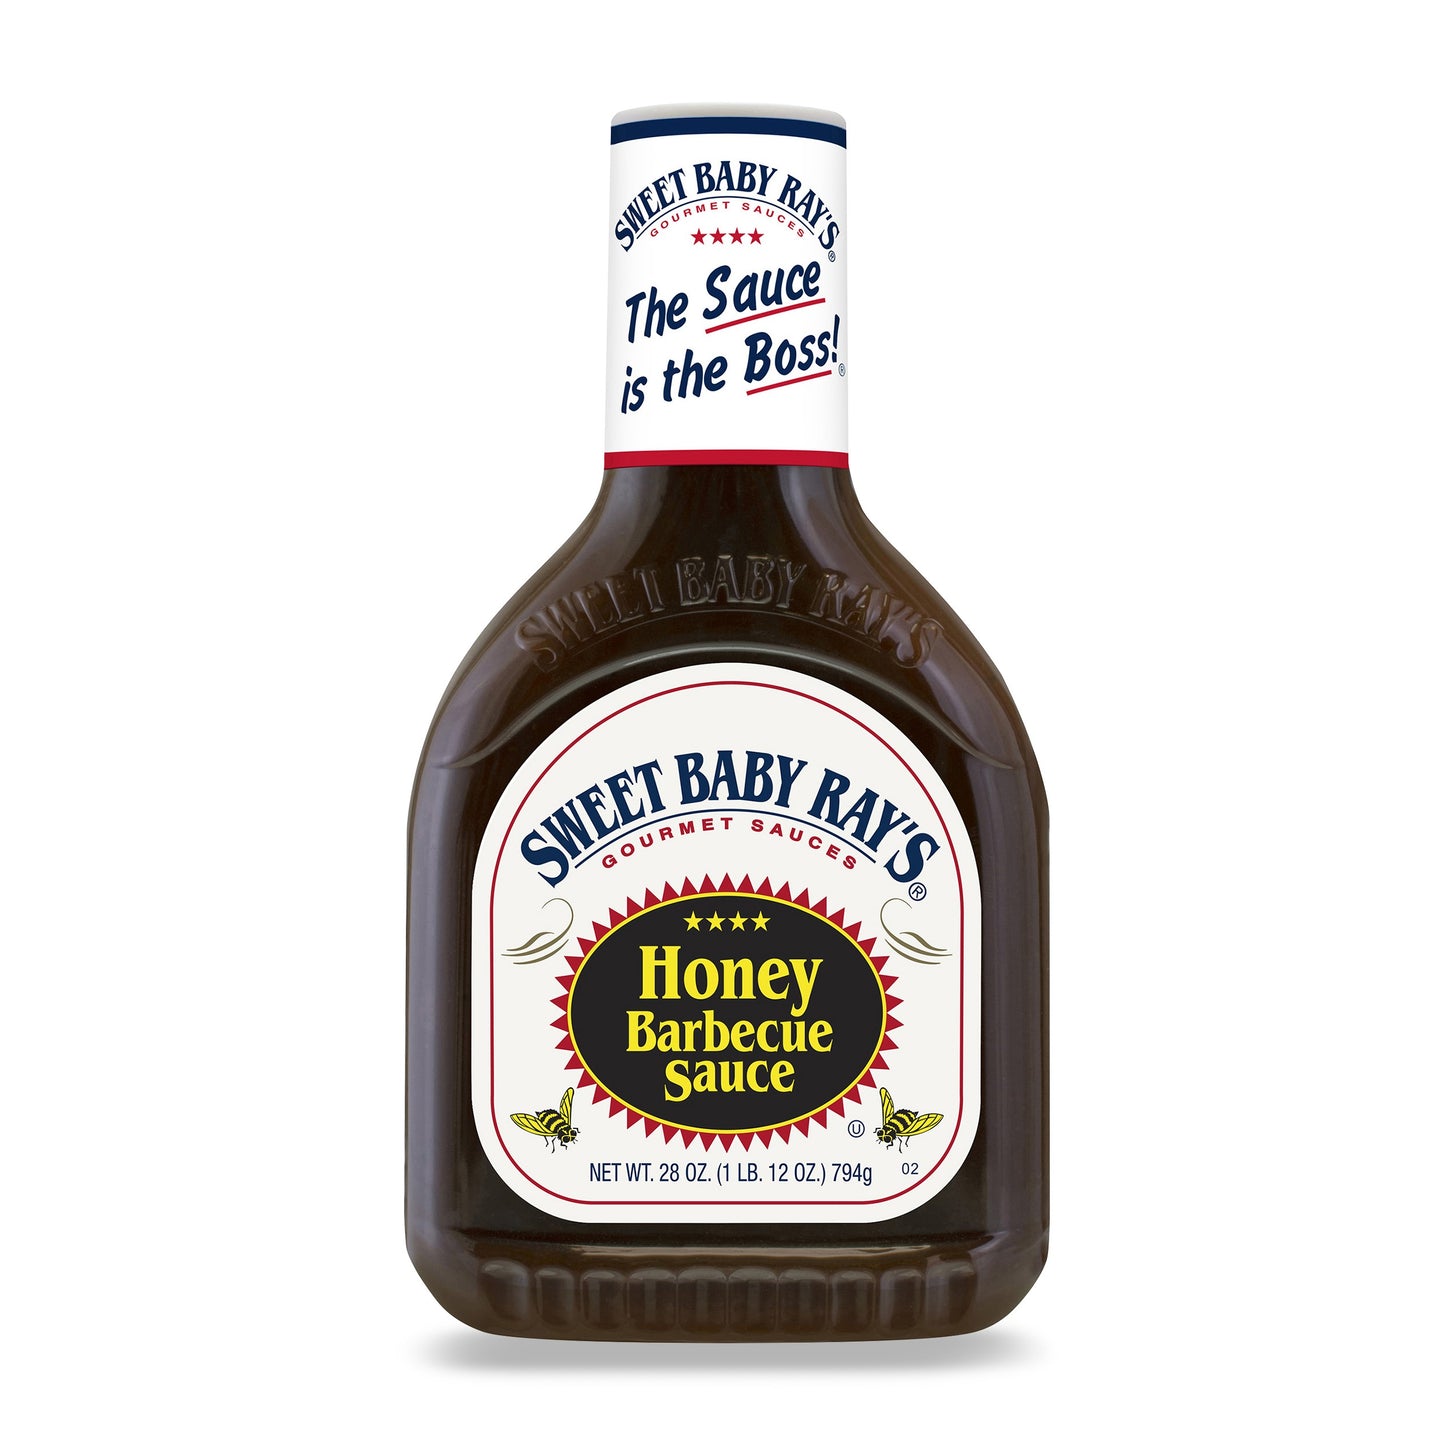 Sweet Baby Ray's BBQ Honey Barbecue Sauce 18oz